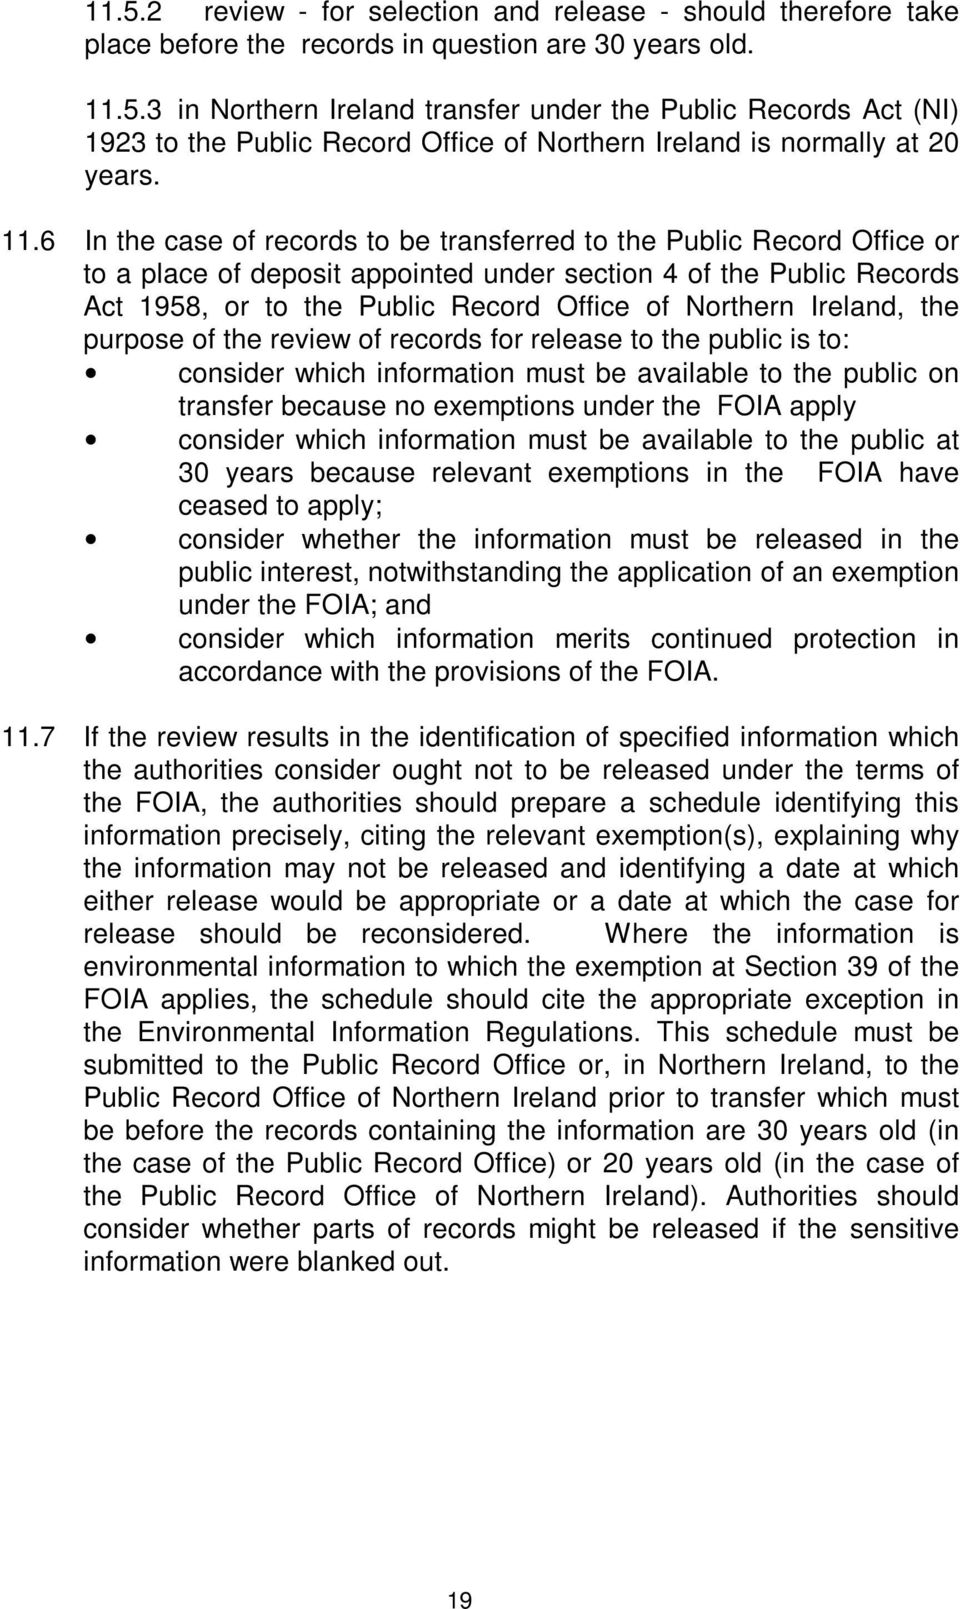 Ireland, the purpose of the review of records for release to the public is to: consider which information must be available to the public on transfer because no exemptions under the FOIA apply